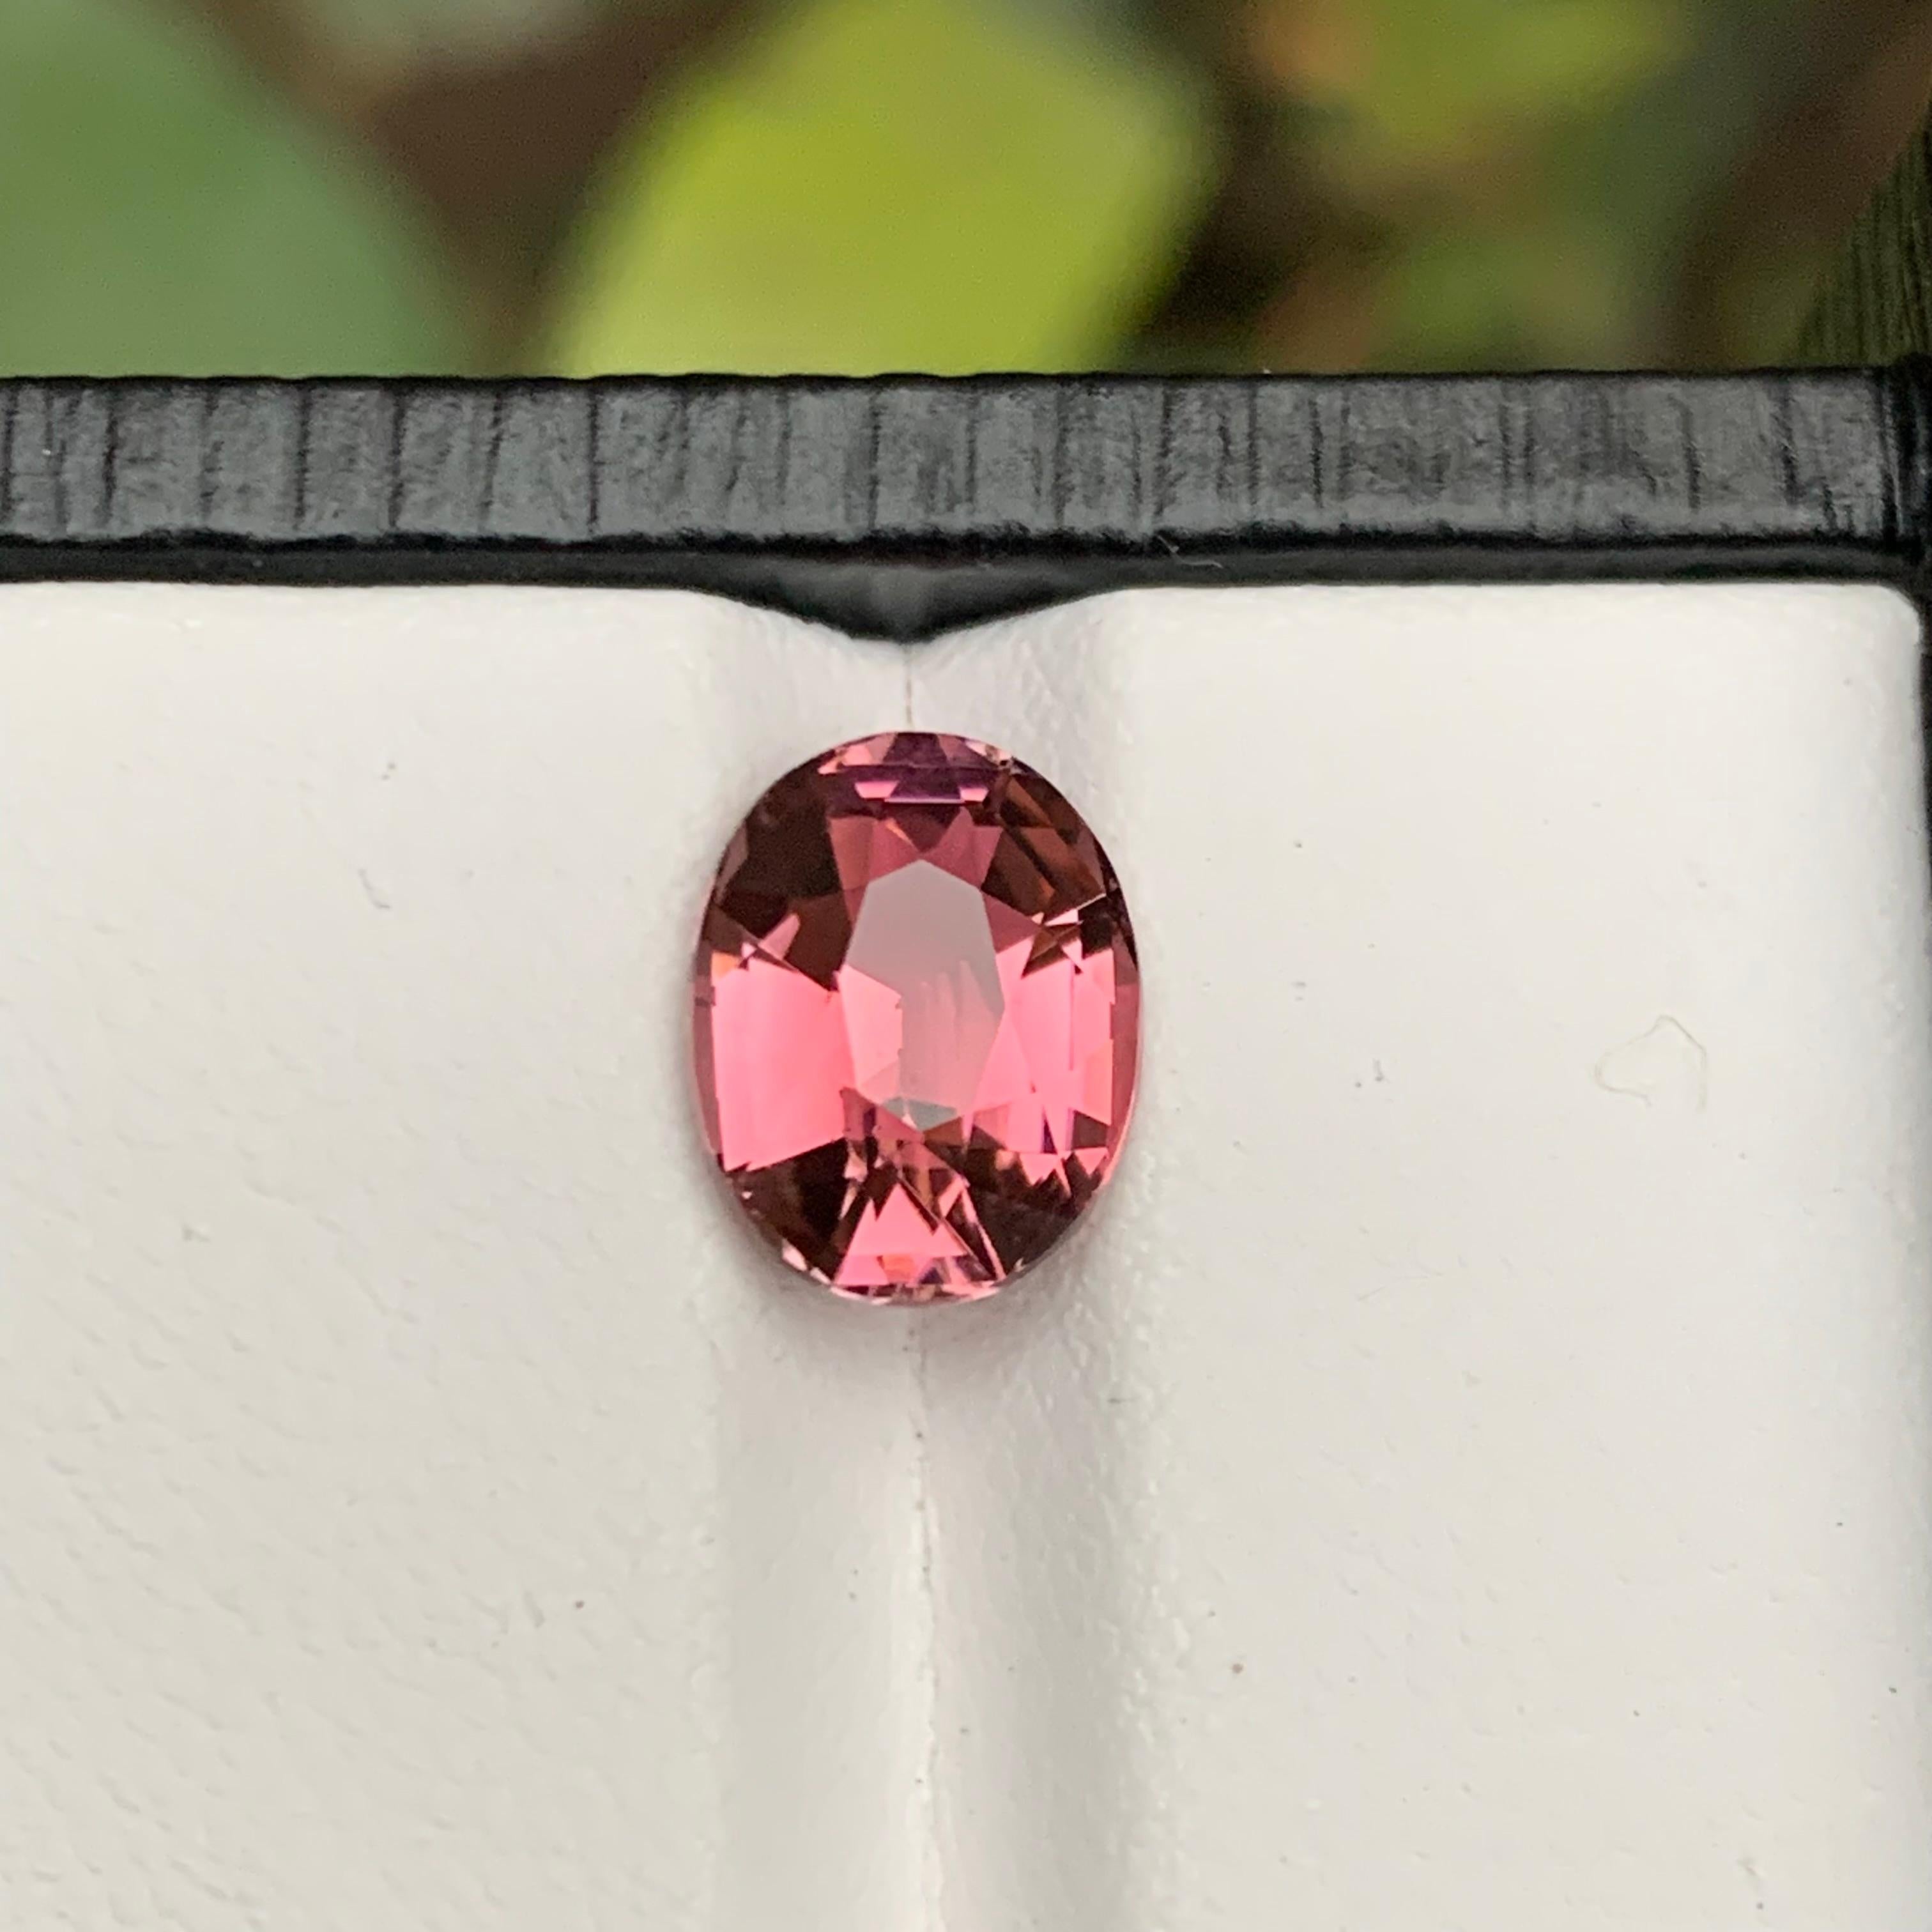 Presenting our top-class Rare Pink Cushion Cut Natural Tourmaline, a dazzling gemstone weighing 2.75 carats. Meticulously crafted to showcase excellent luster and clarity, this rare find is perfect for various jewelry settings, particularly as a